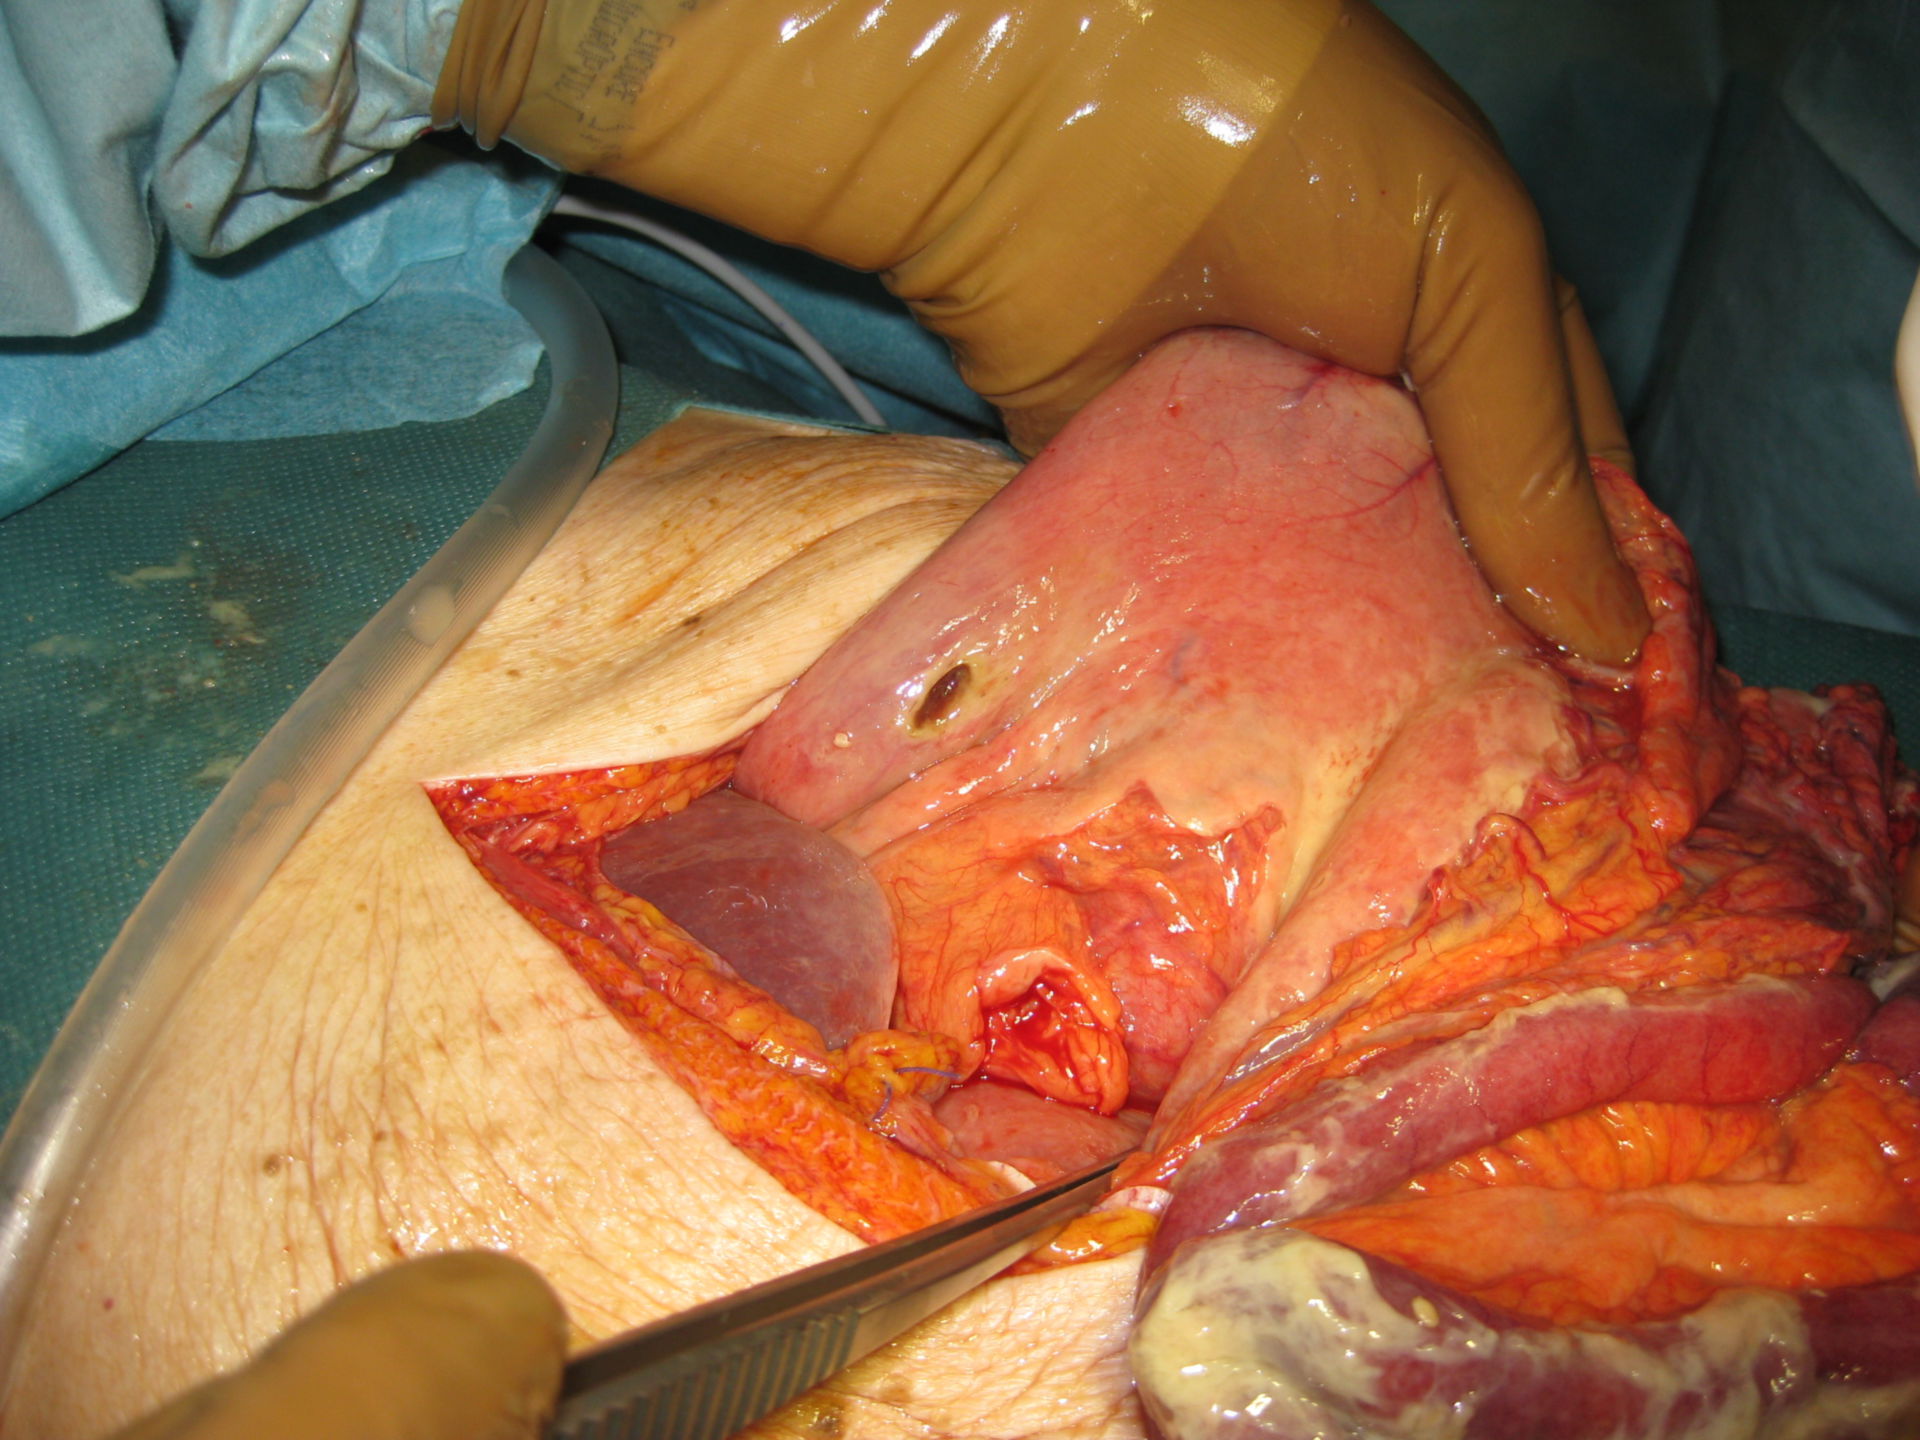 Perforated gastric ulcer